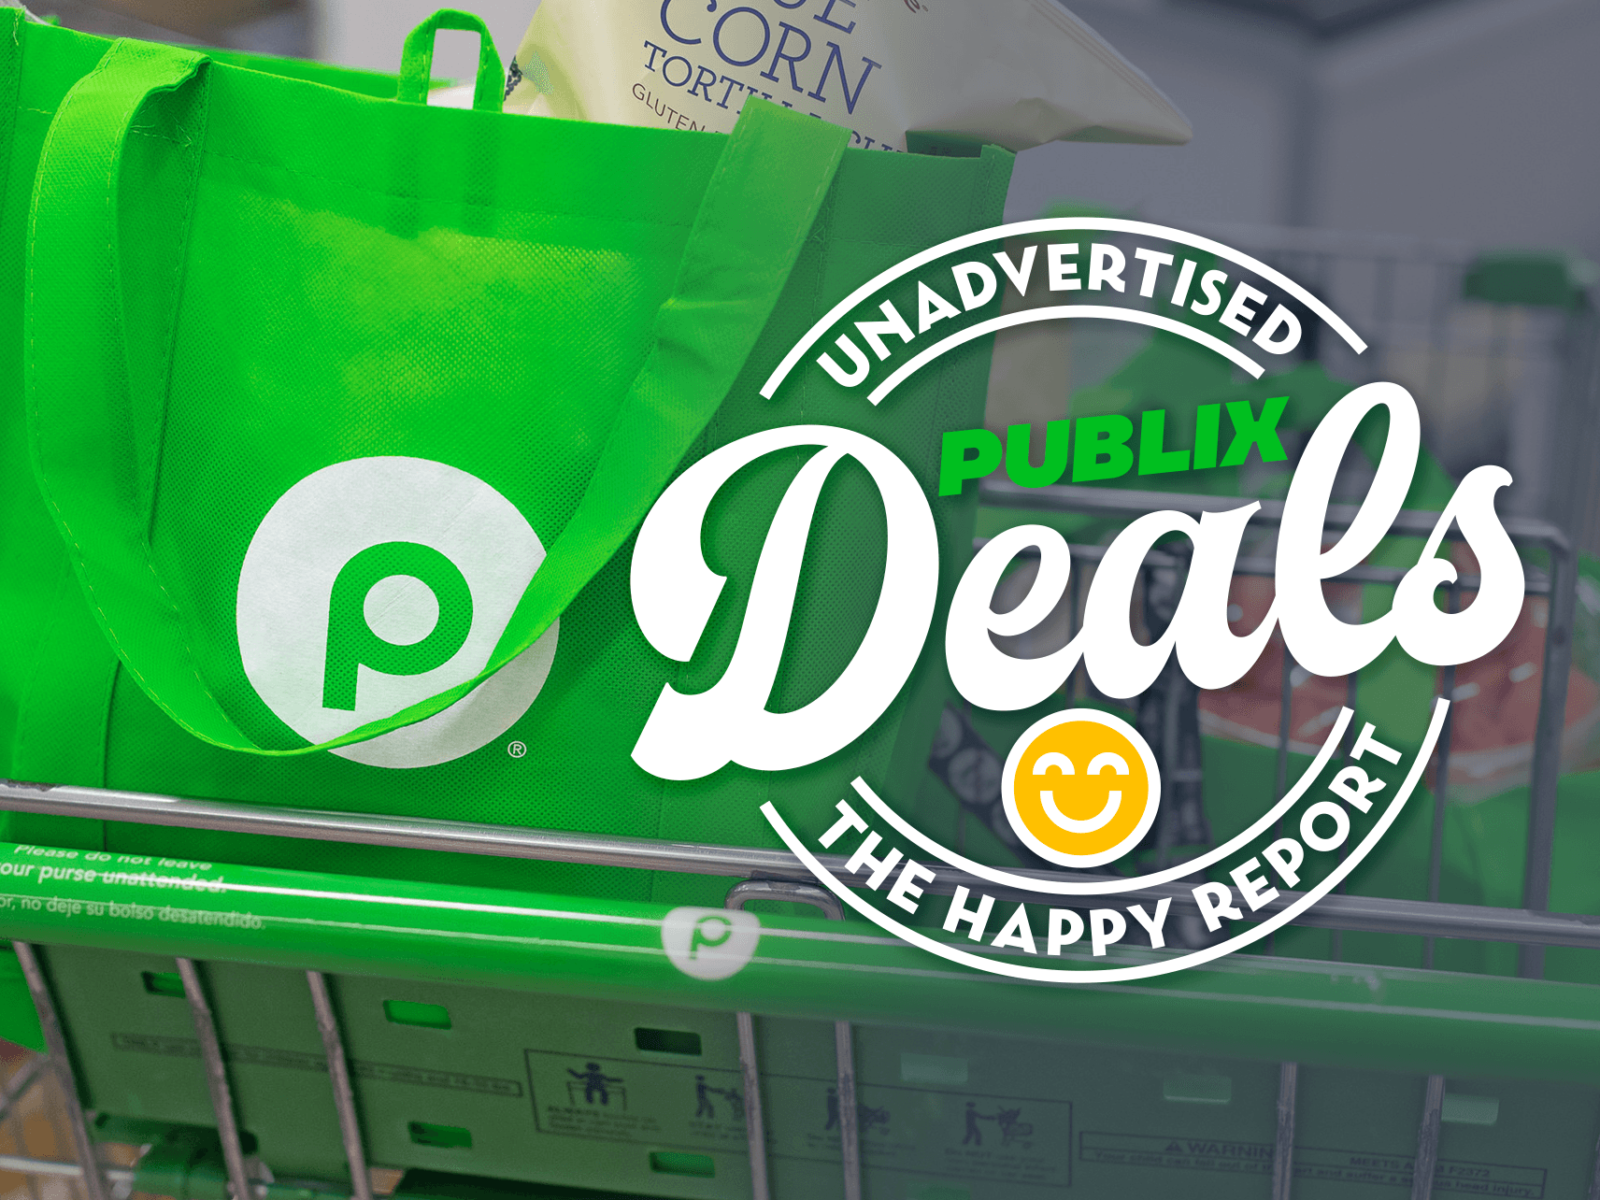 Unadvertised Publix Deals 9/27 – The Happy Report